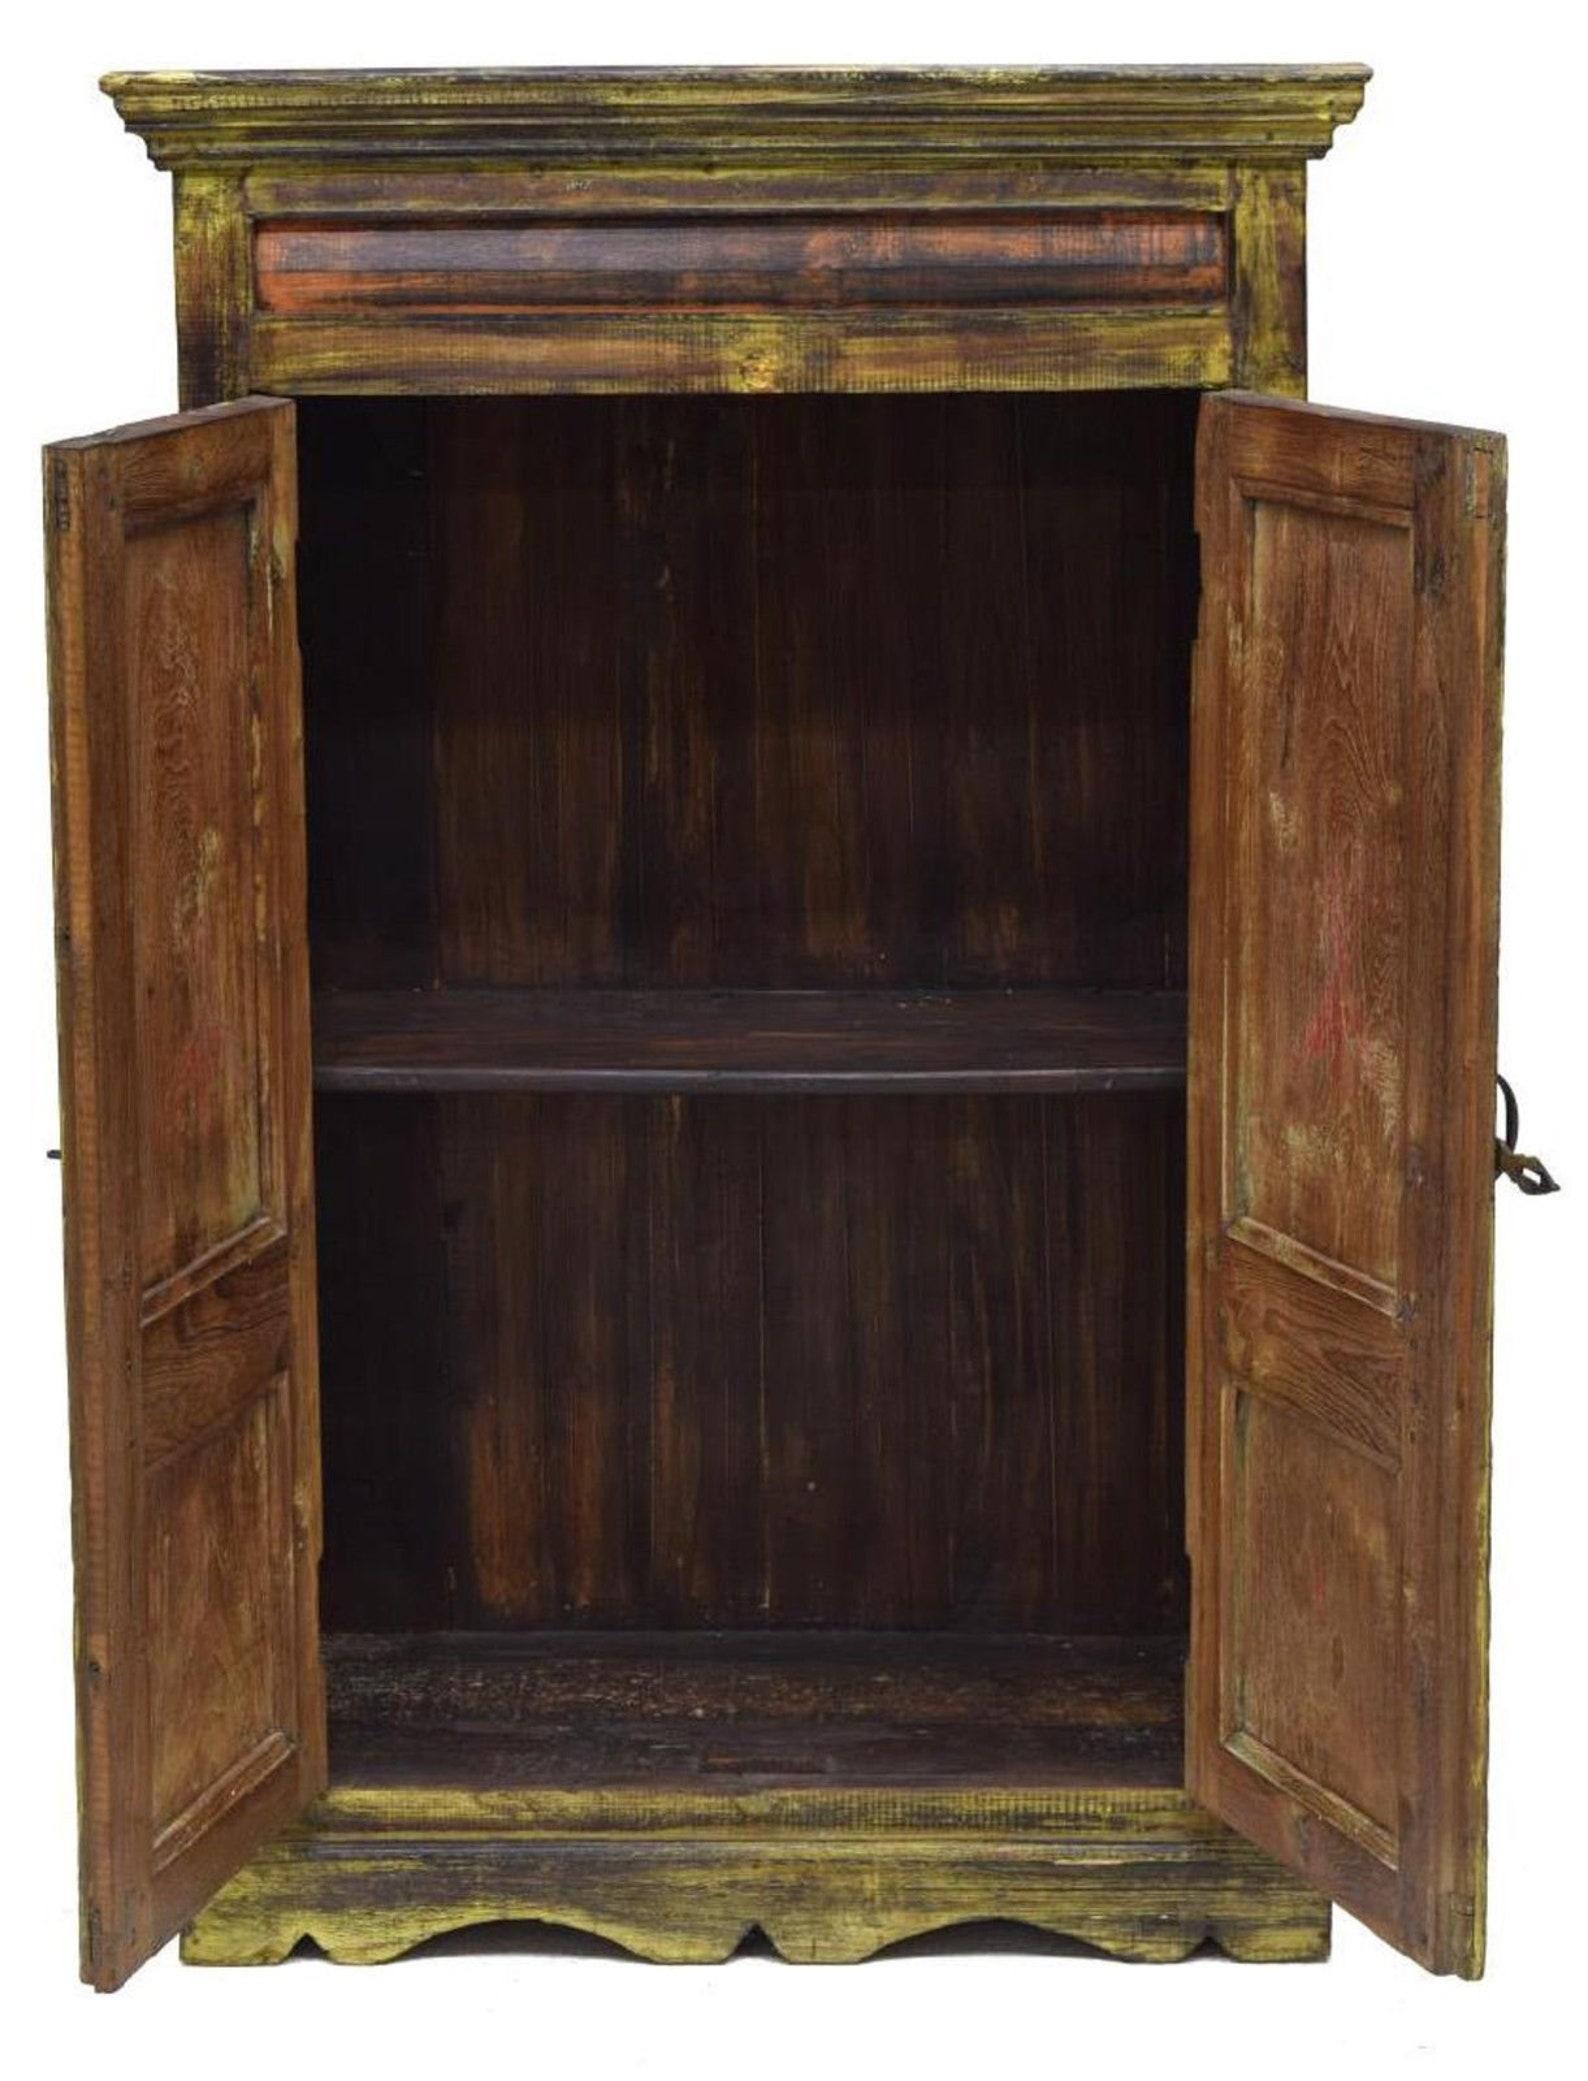 This Dutch Colonial kitchen cabinet is from the 19th century, and has a corniced top, over two-door cabinet, with iron hardware, shelves to interior, rising on scalloped base, bracket feet, with remnants of yellow and orange paint.

Dimensions